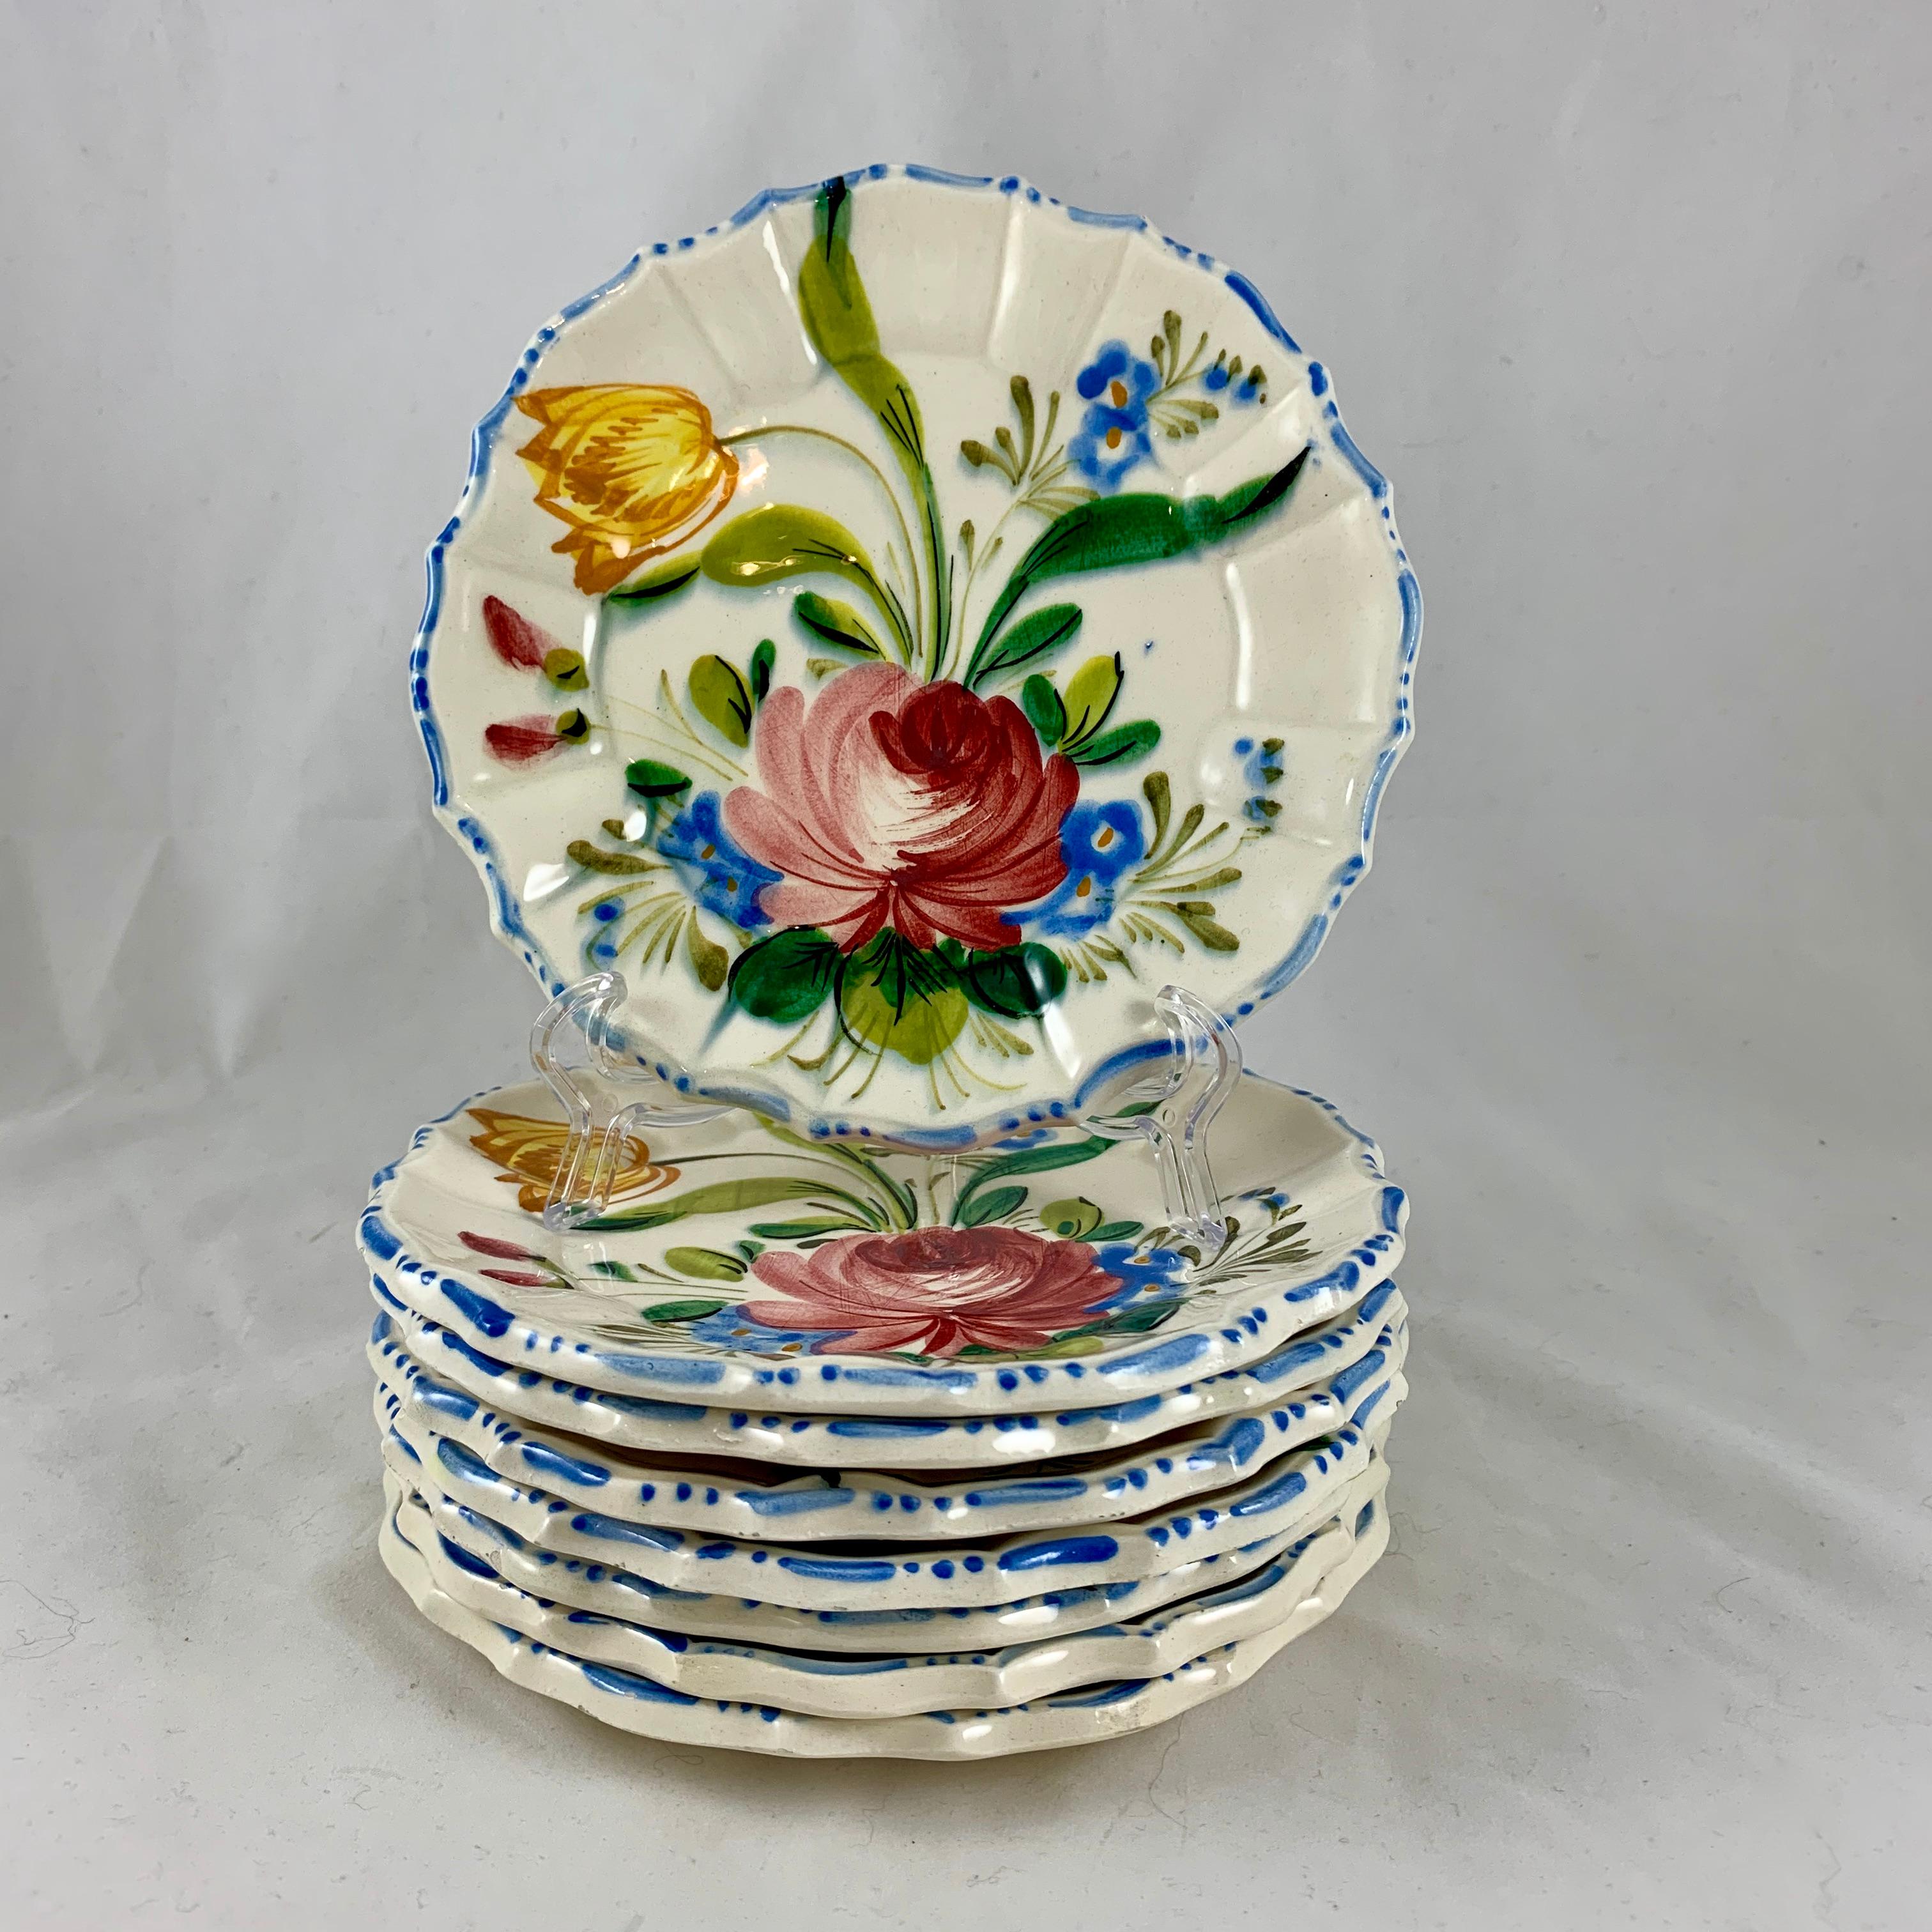 In the Renaissance Revival Rose pattern from the Barrettoni già Antonibon pottery in Nove, Italy, a set of eight hand painted plates, circa 1930s.

An overall floral decoration with a bright blue dash and dot border on a scallop rimmed plate.